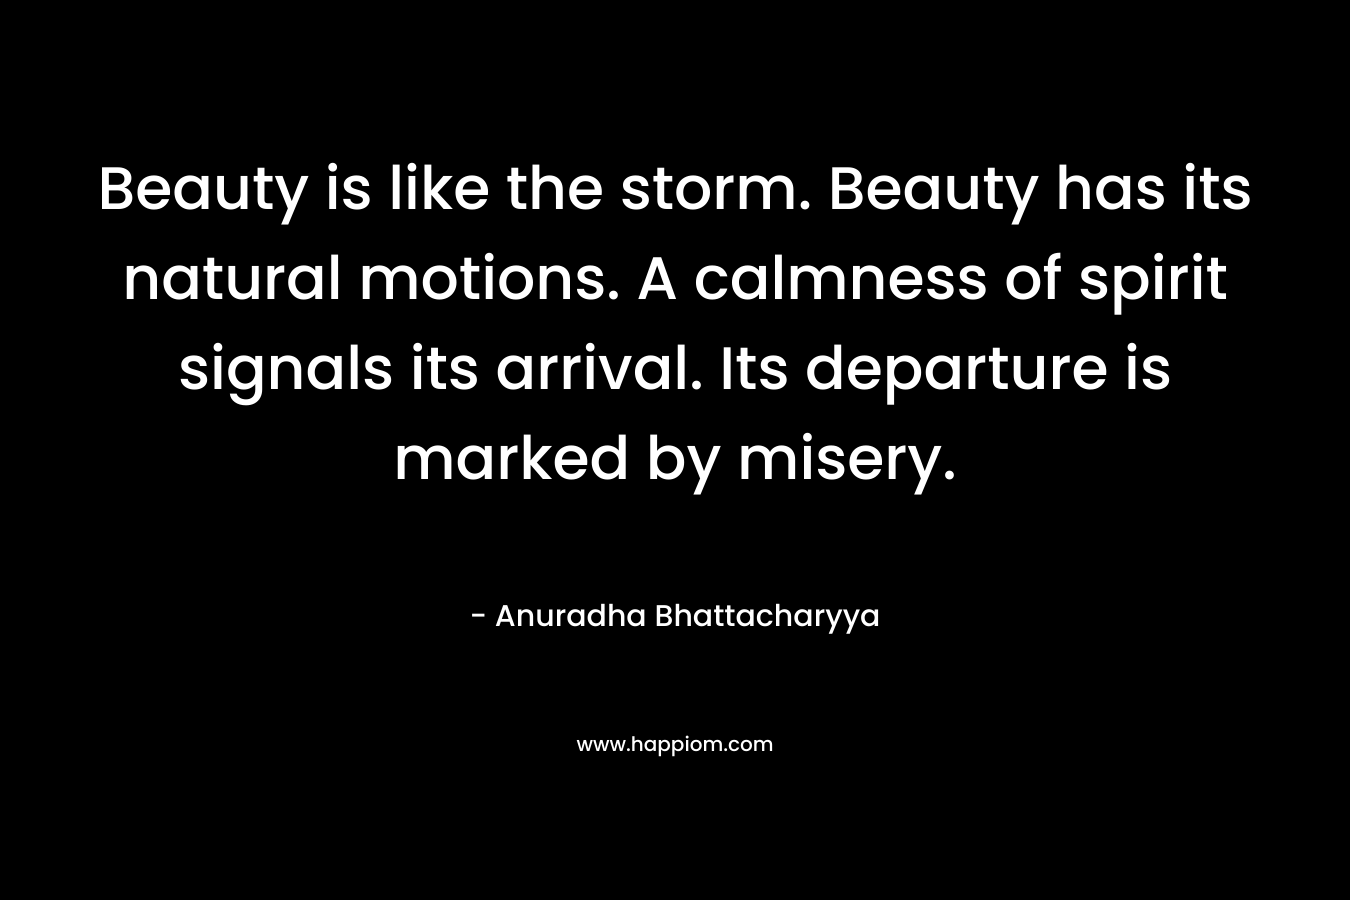 Beauty is like the storm. Beauty has its natural motions. A calmness of spirit signals its arrival. Its departure is marked by misery.